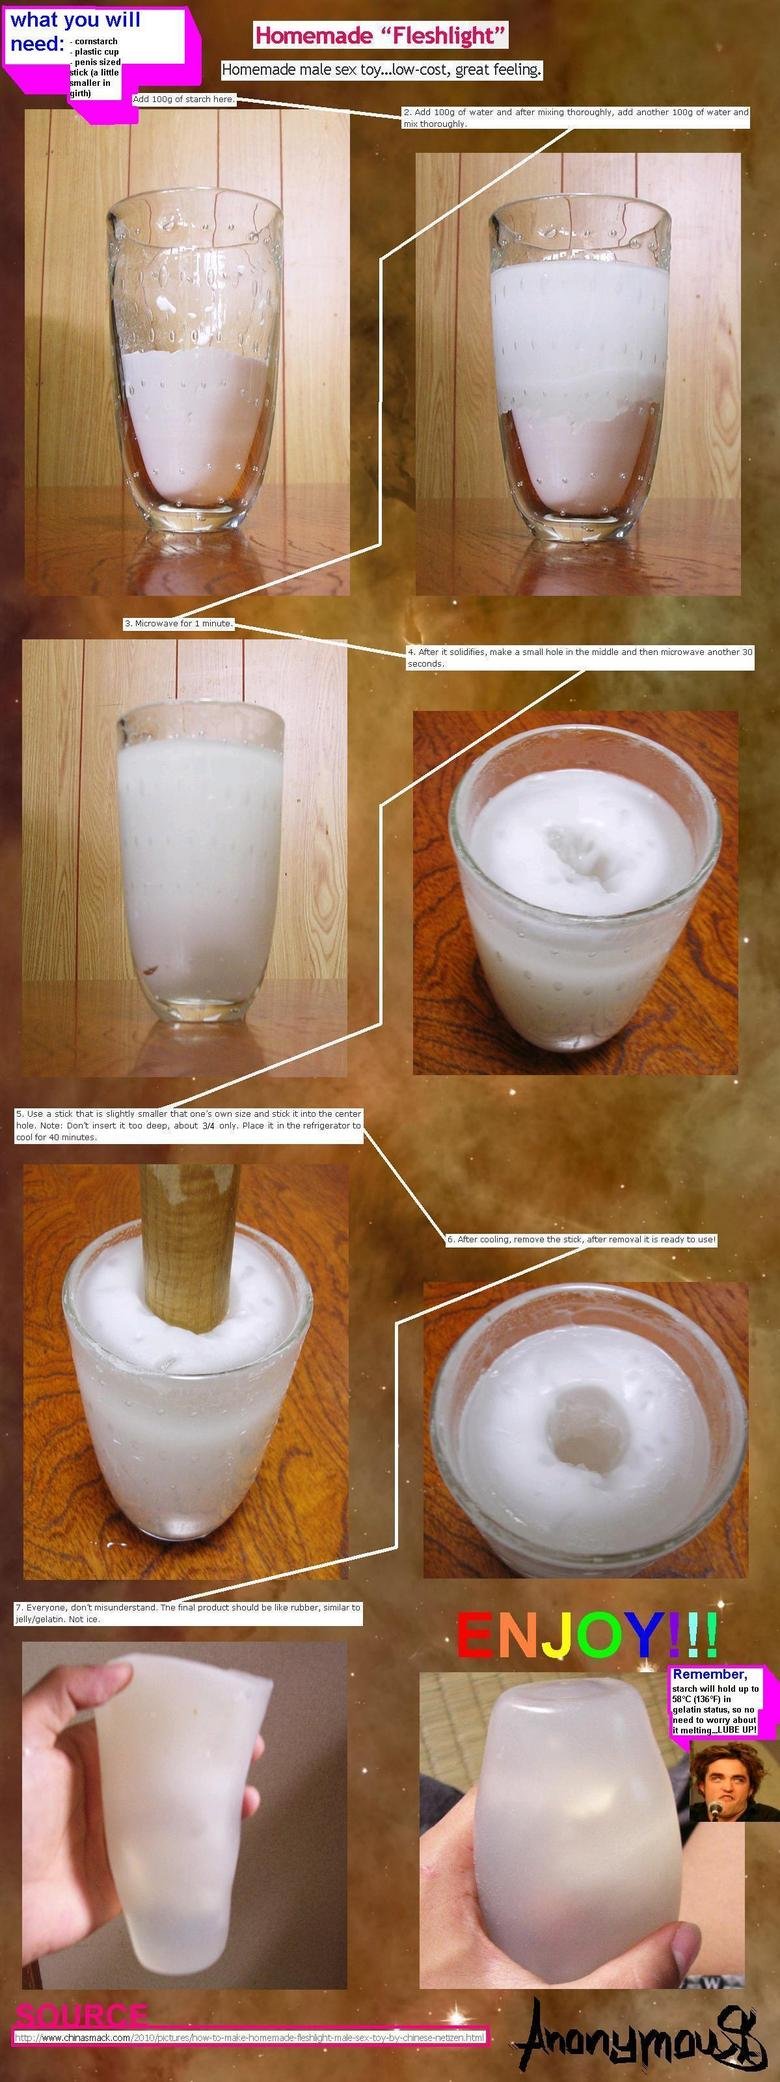 How to make a homemade fleshlight. what you will plastic cup Innis sized Ho...